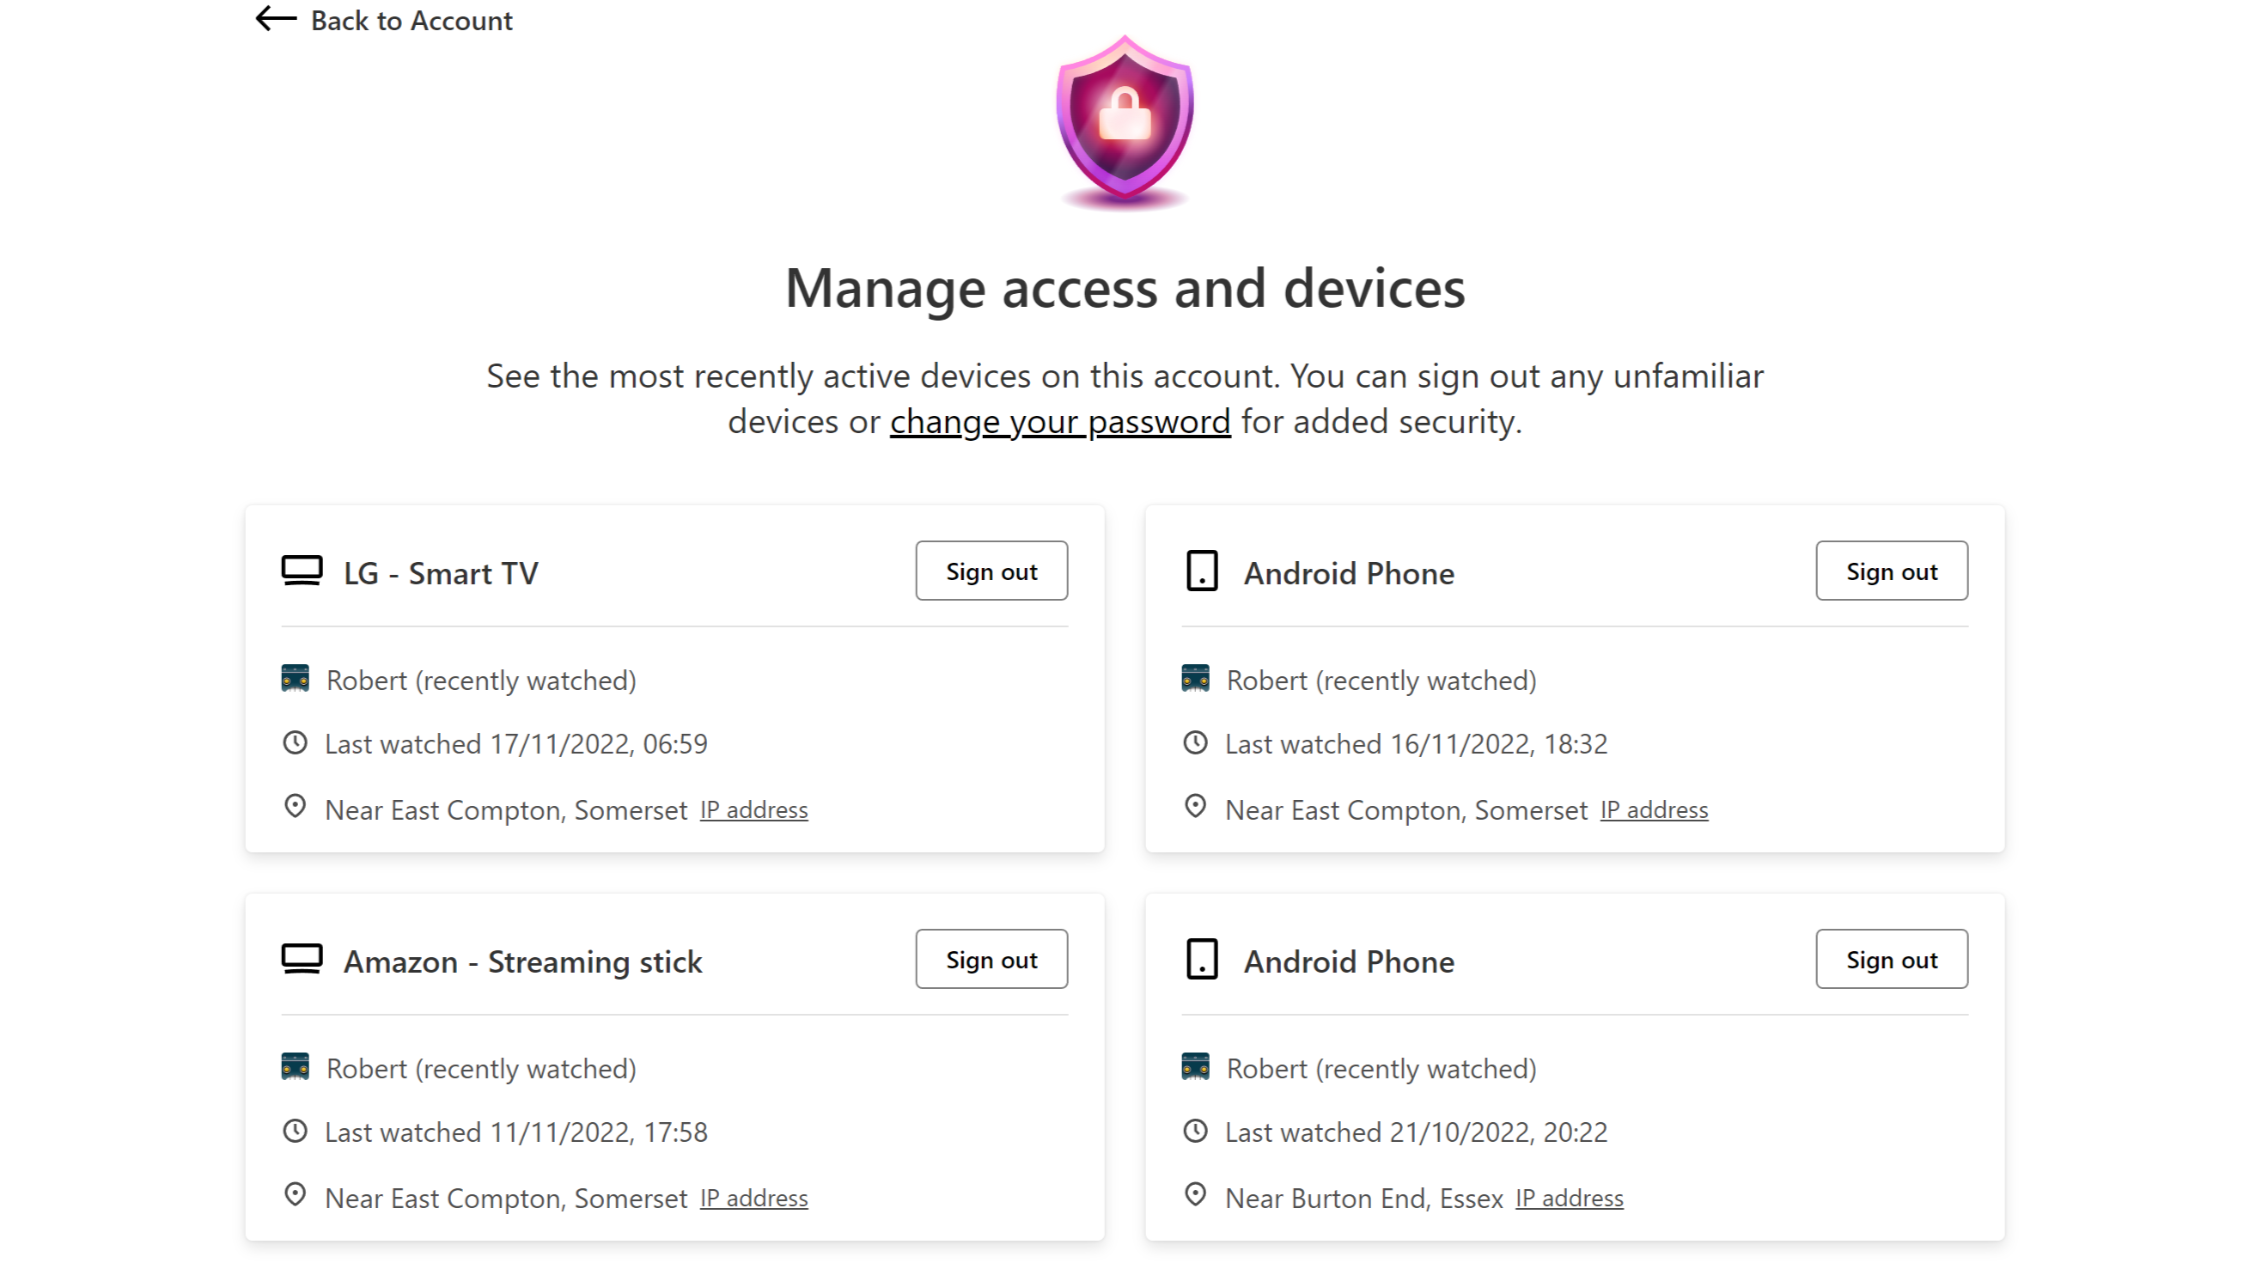 Netflix Manage Access and Devices screen